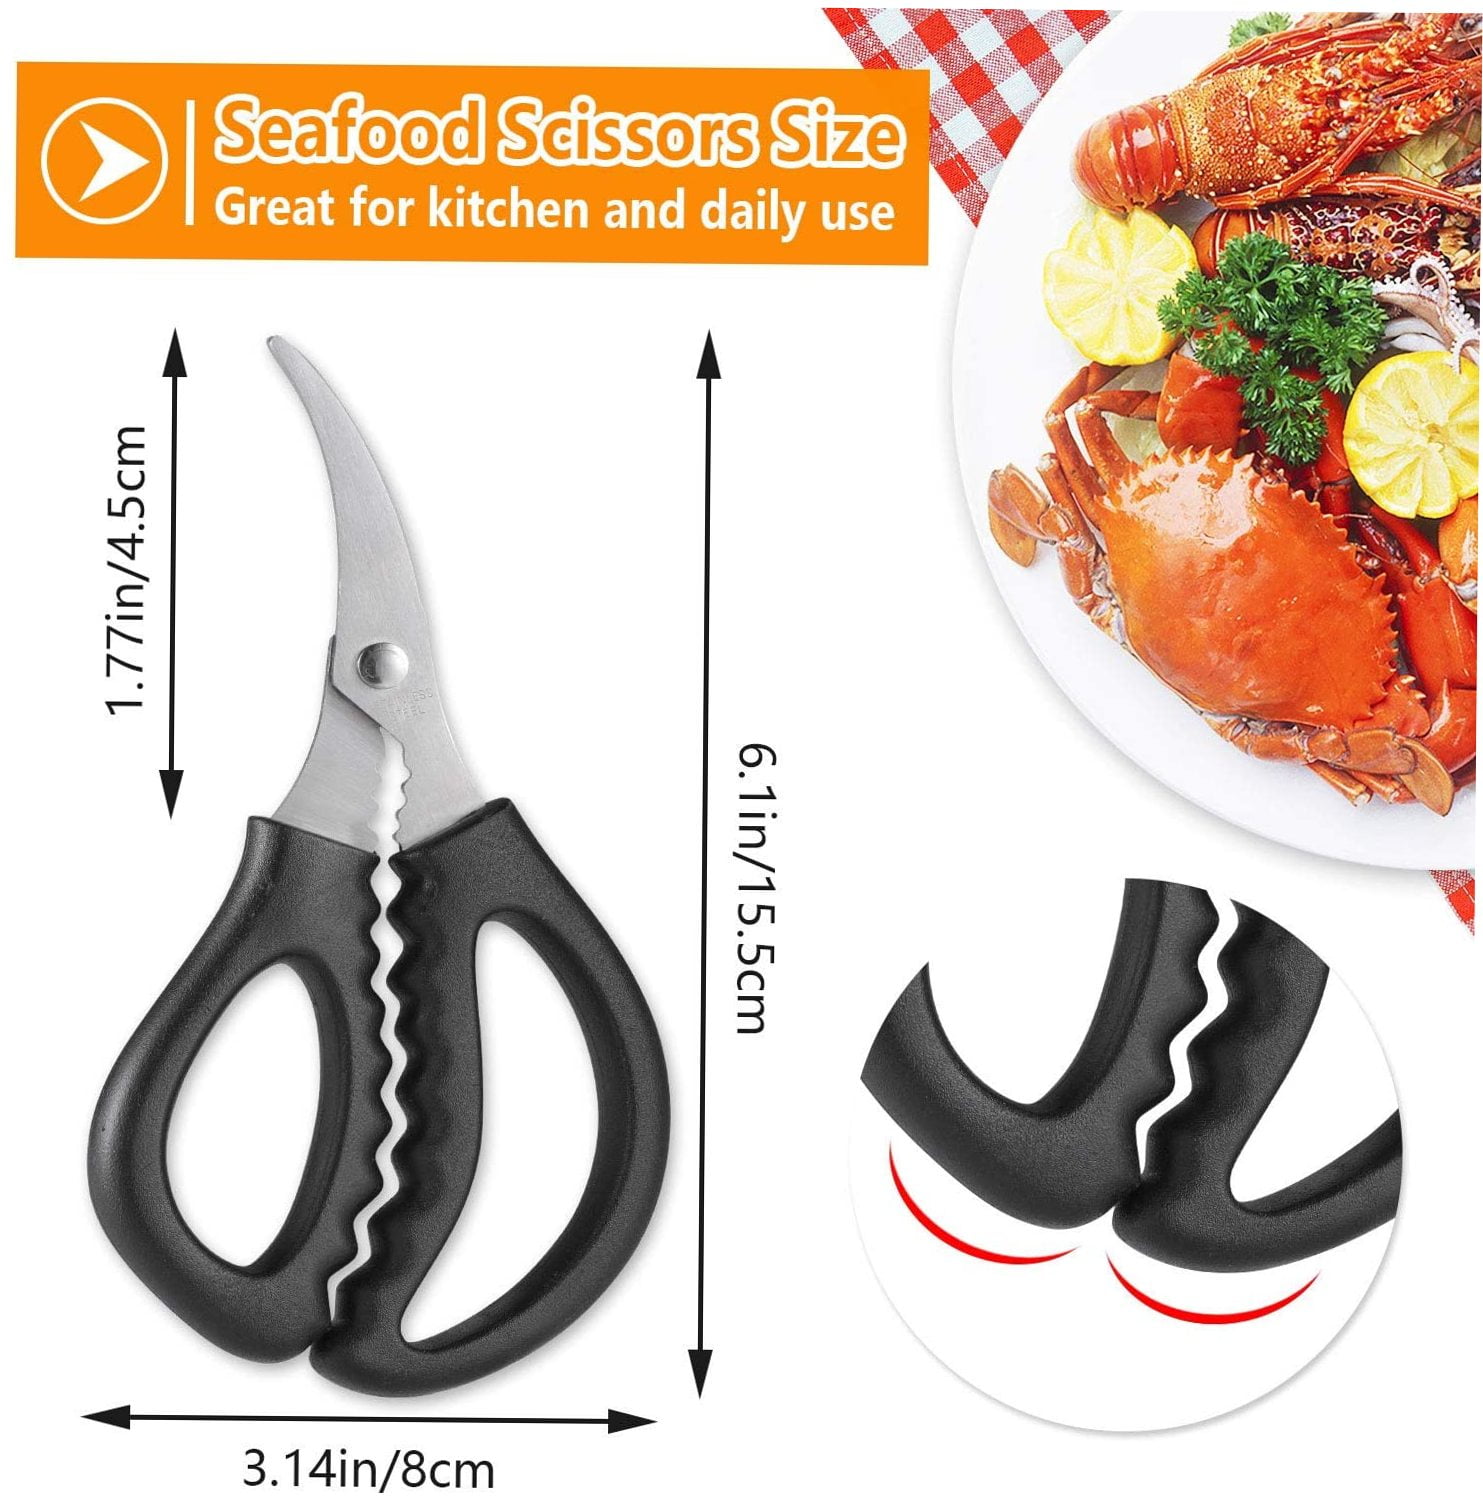 Stainless Steel Seafood Crab Lobster Scissors Shellfish Food Shears Cutting Tool 